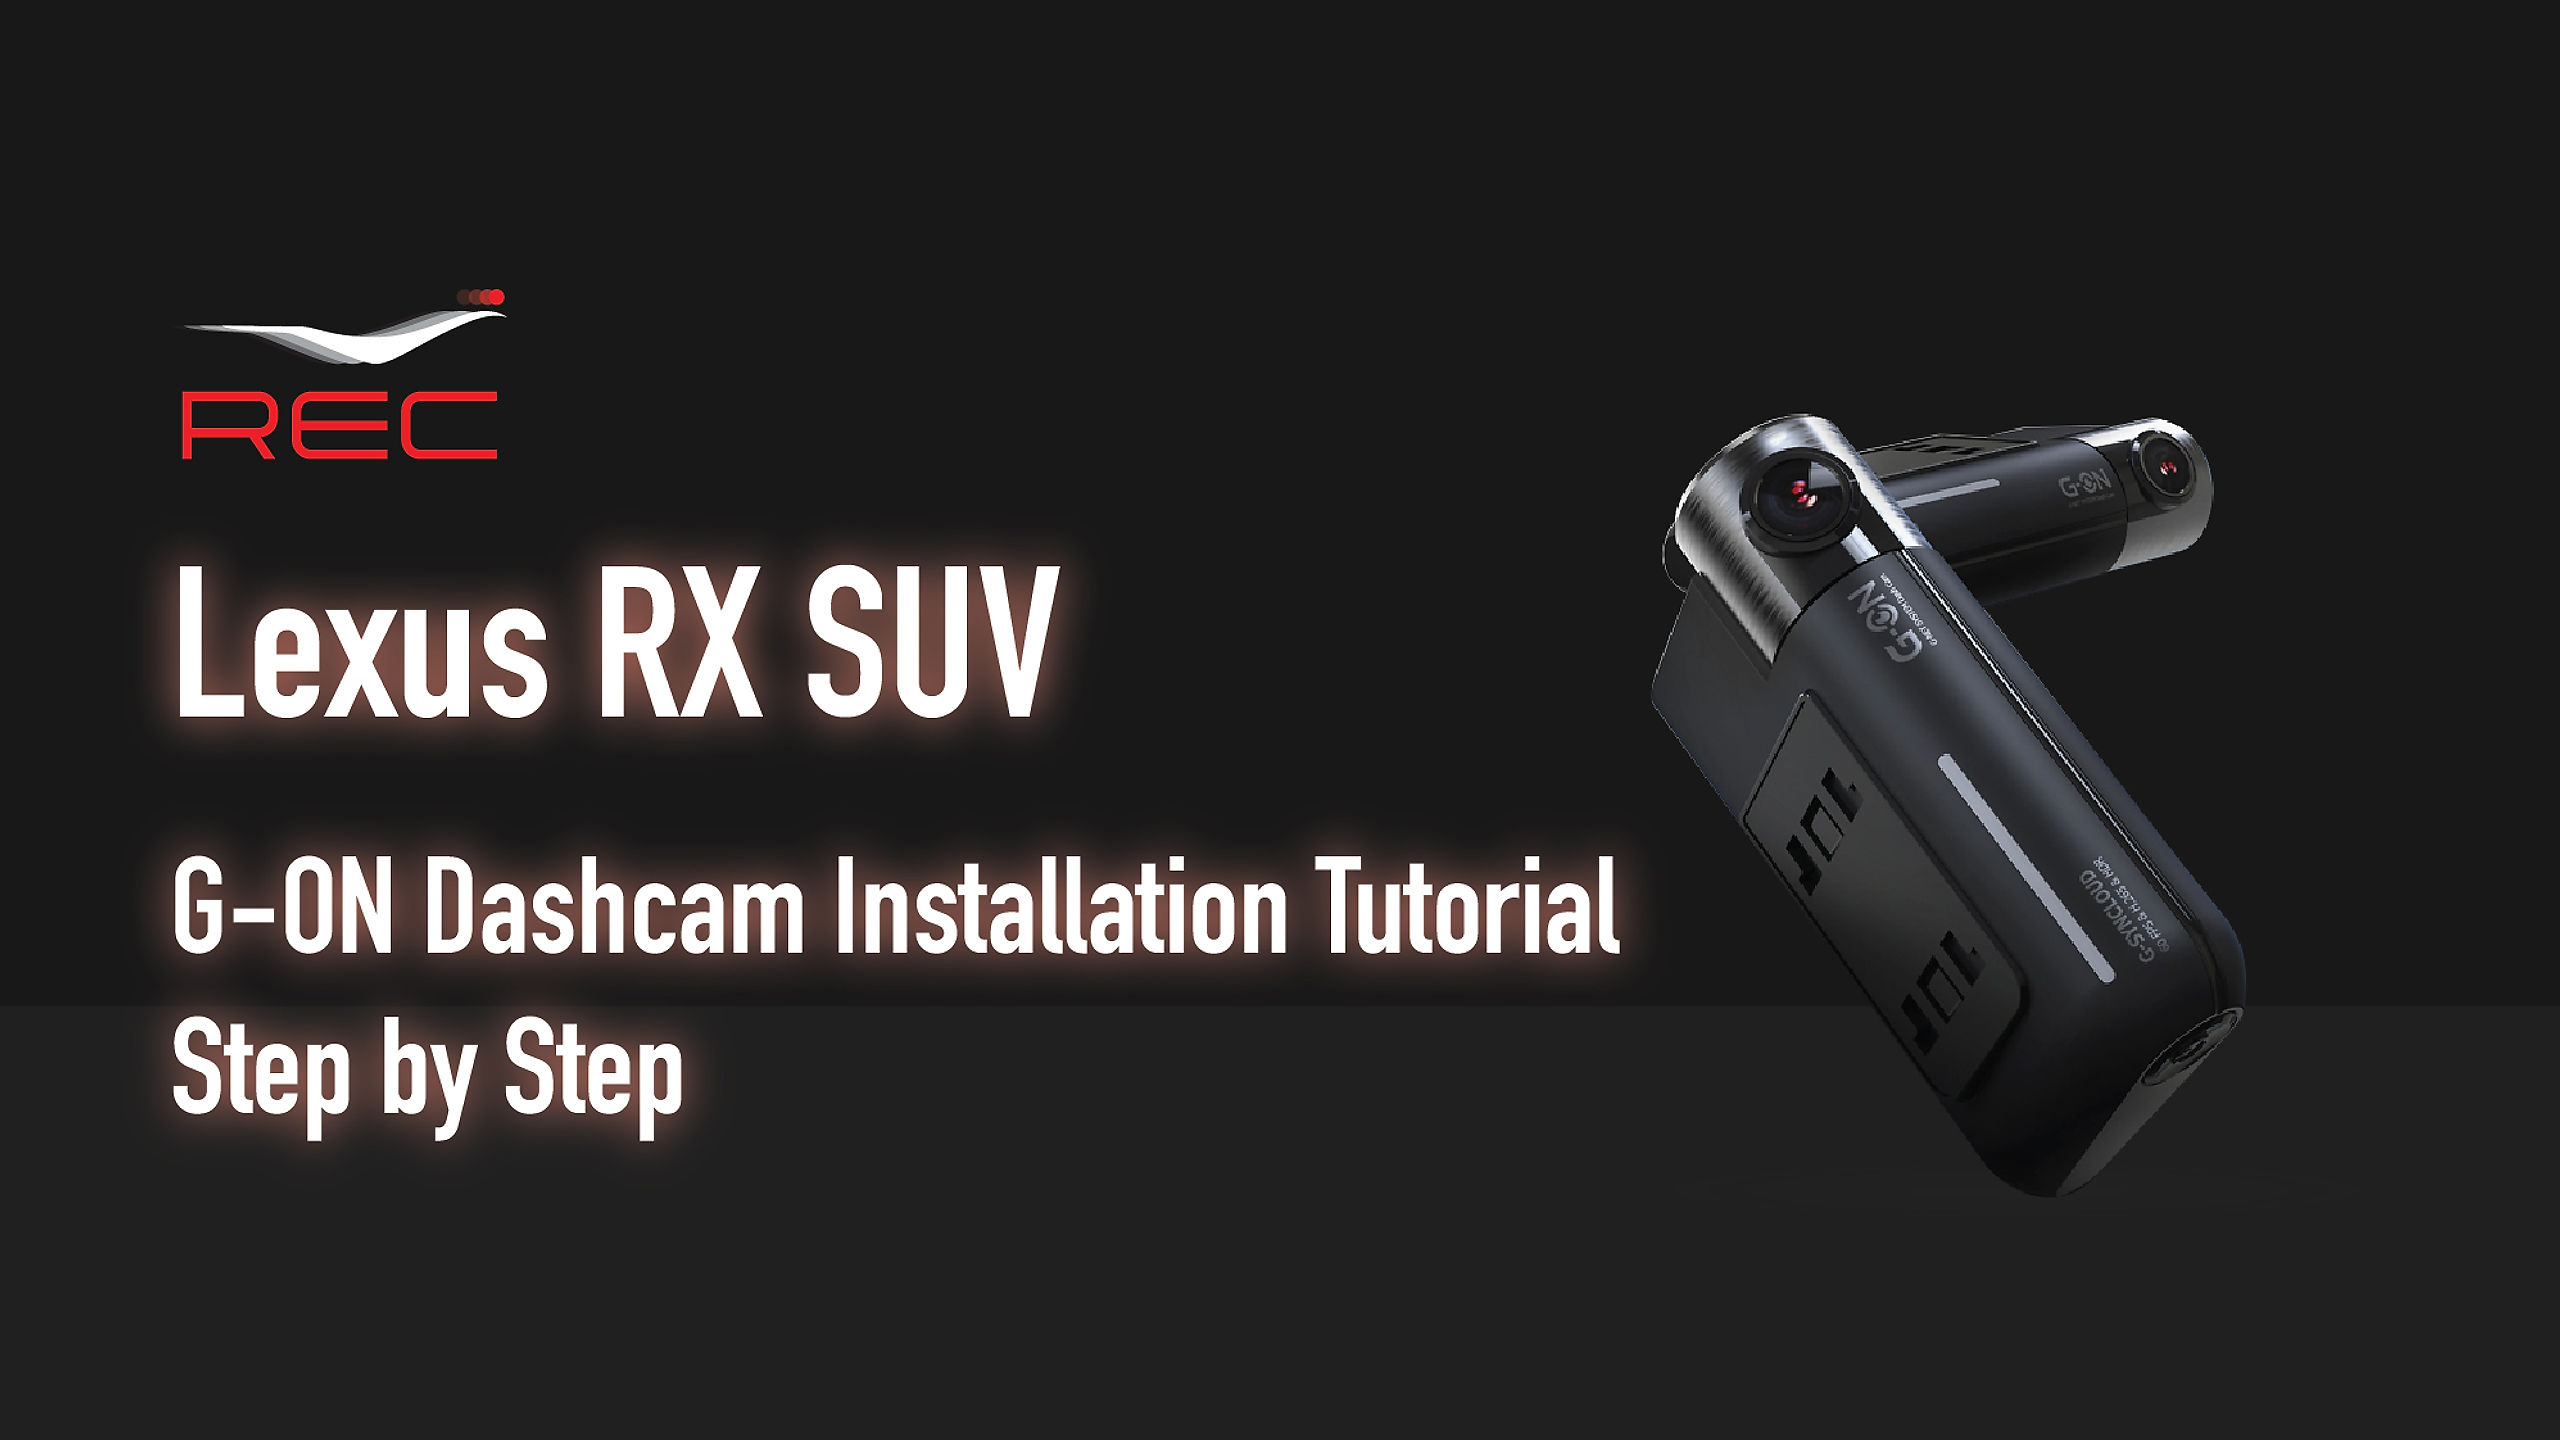 How to Install Gnet G-on Dashcam on Lexus RX Perfectly? Step by step hard wiring installation